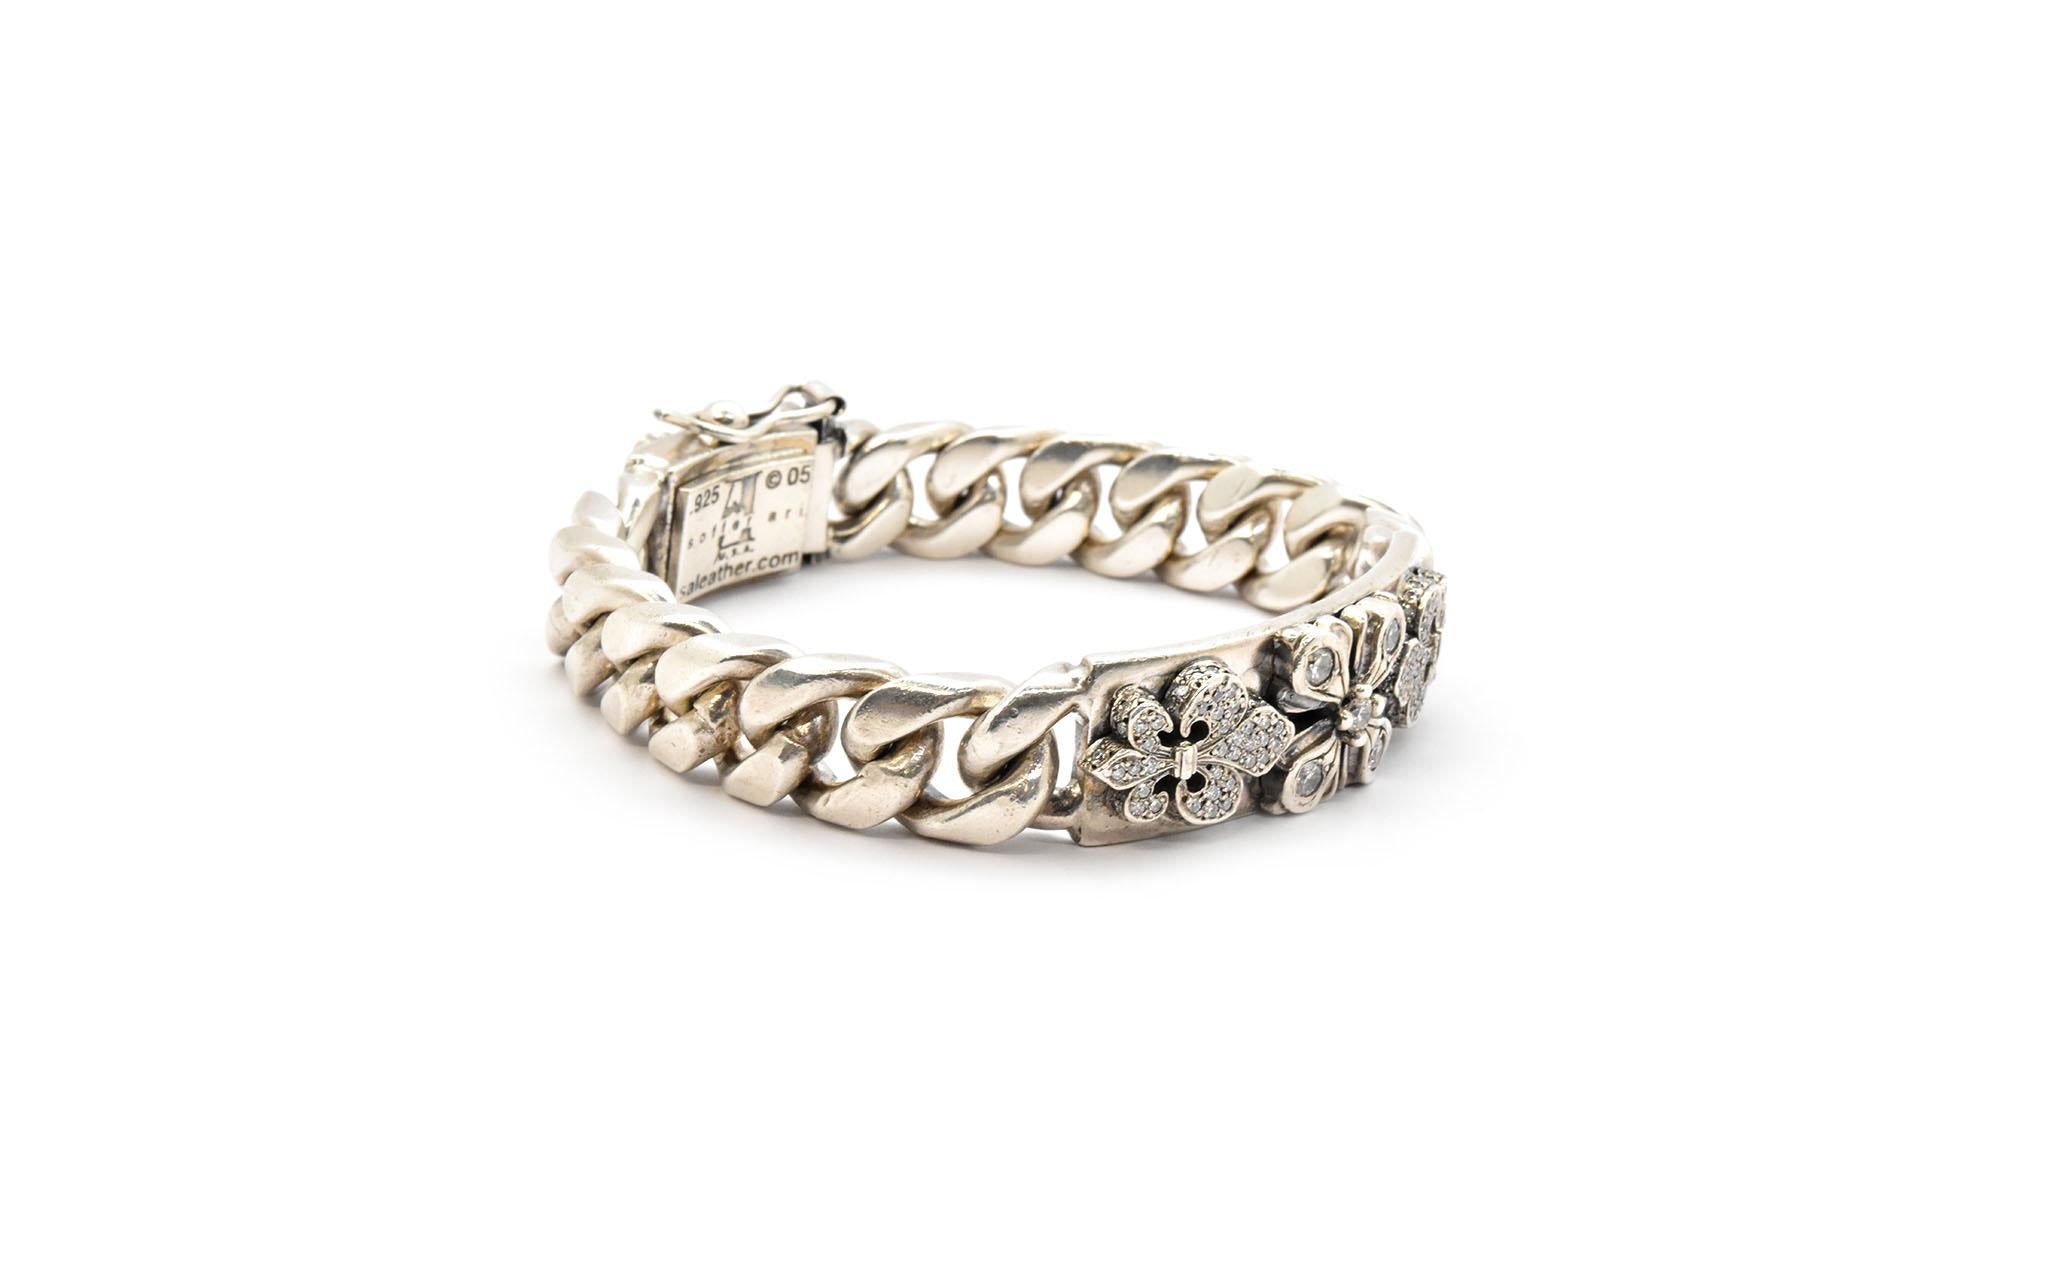 Designer: Soffer Ari
Material: sterling silver
Dimensions: bracelet is approximately 3/4-inches wide and 8 1/2-inches long 
Weight: 150.30 grams
Retail: $11,800.00
